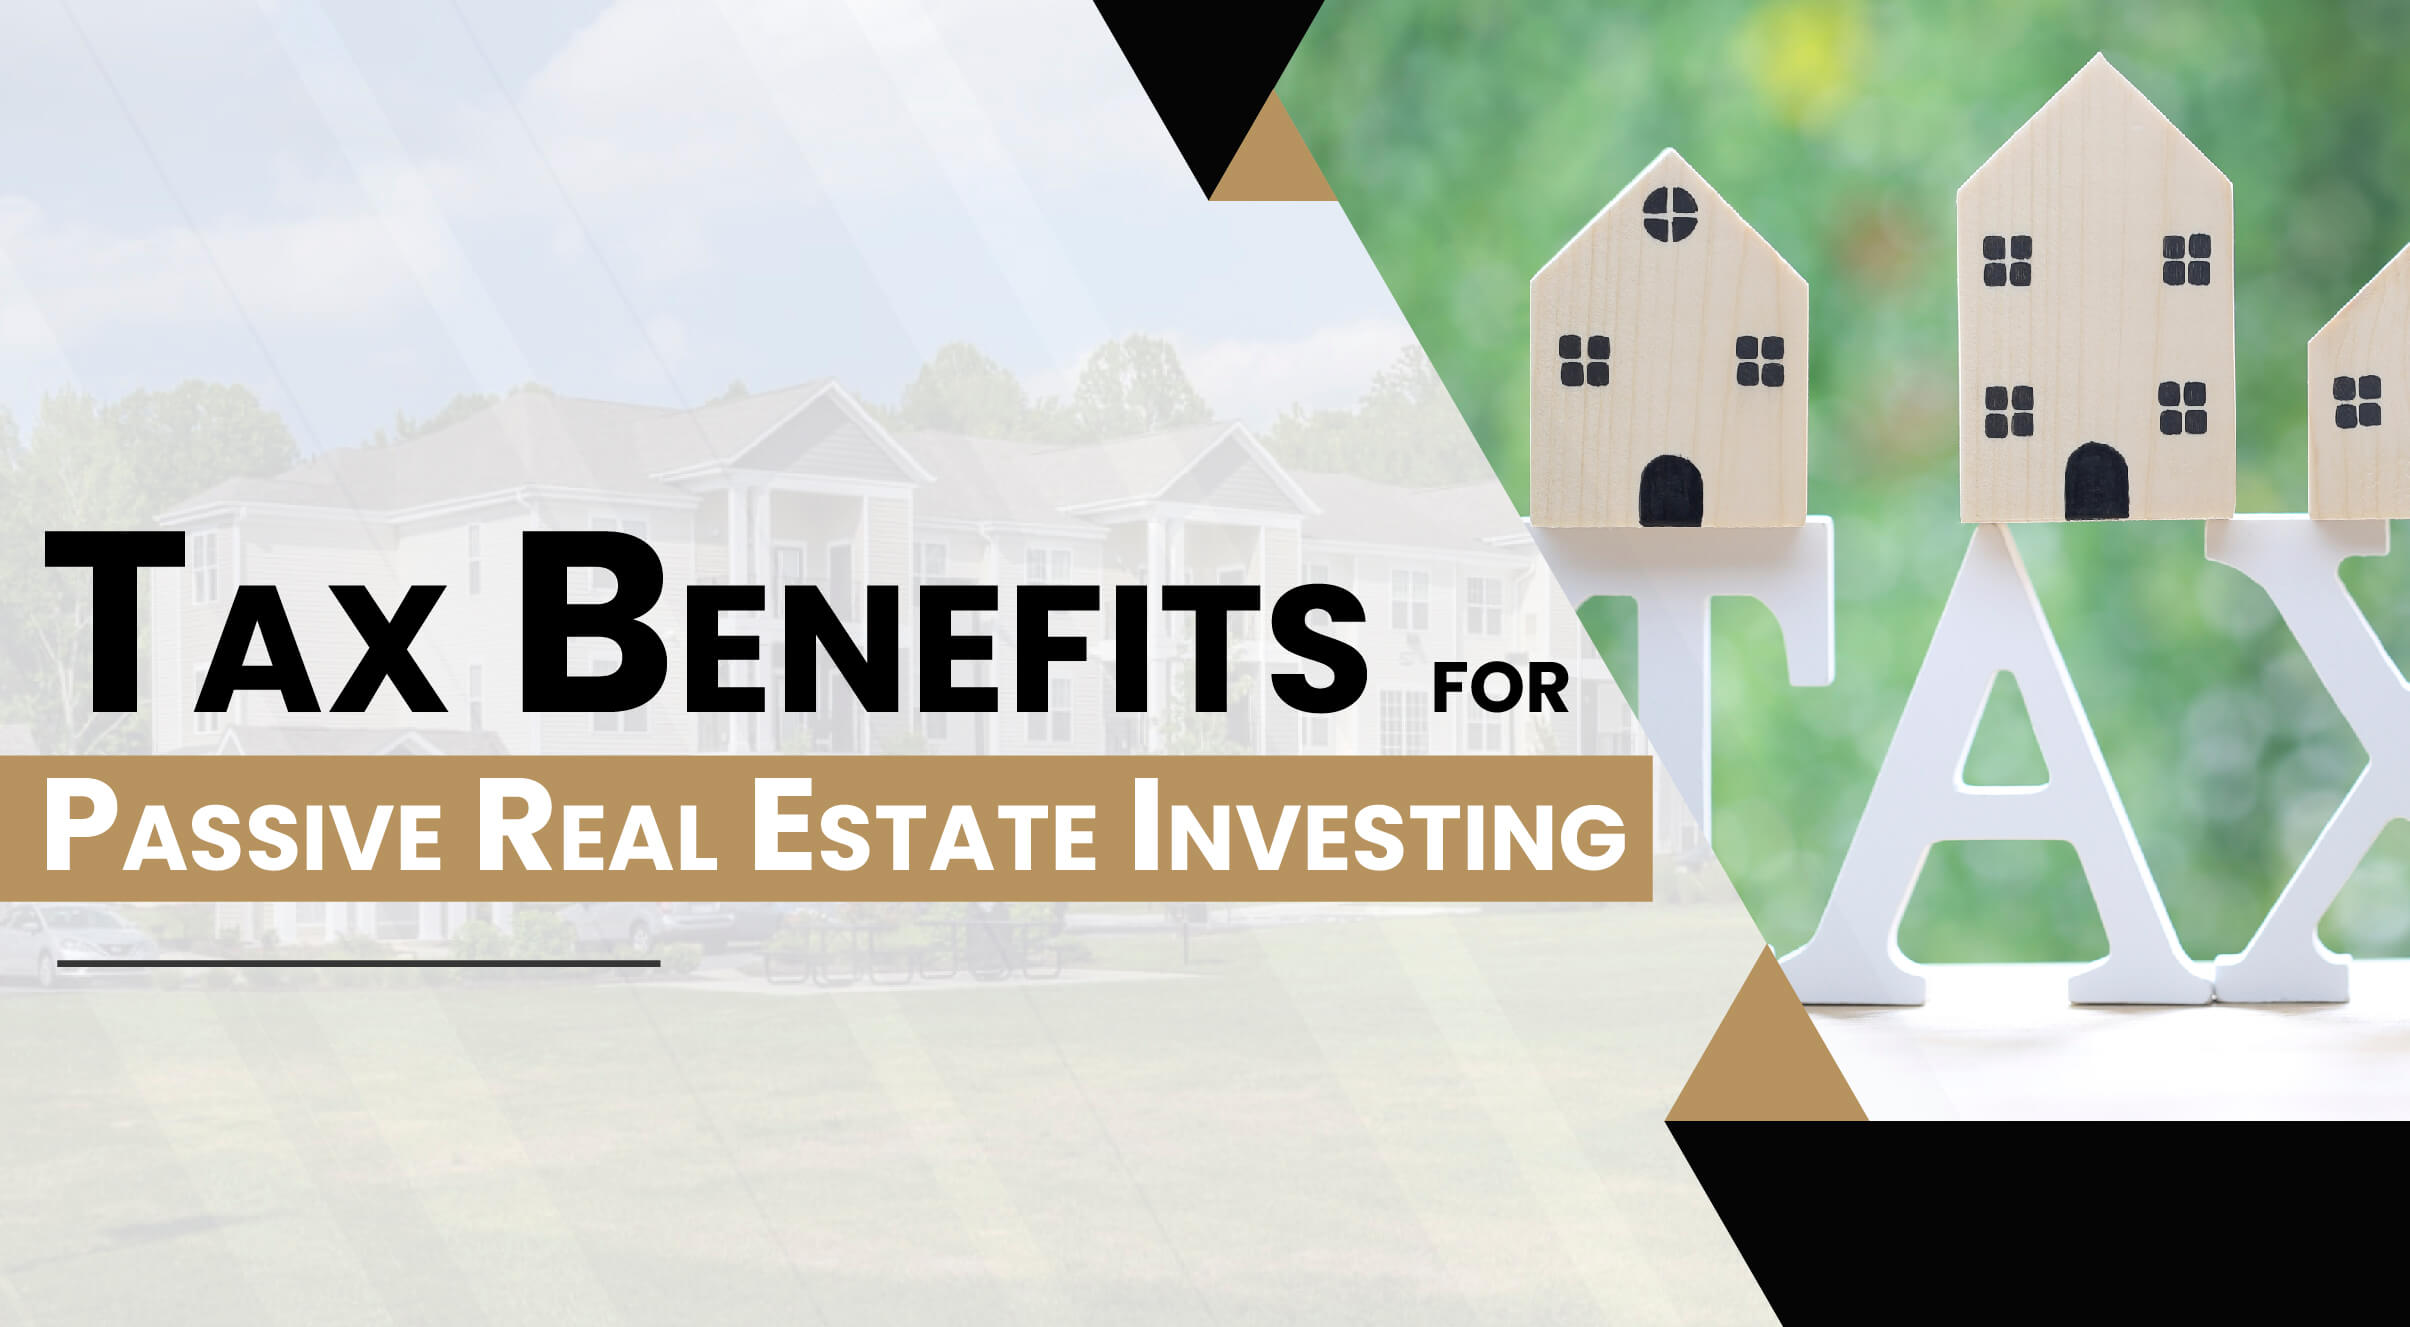 Tax Benefits for Passive Real Estate Investing